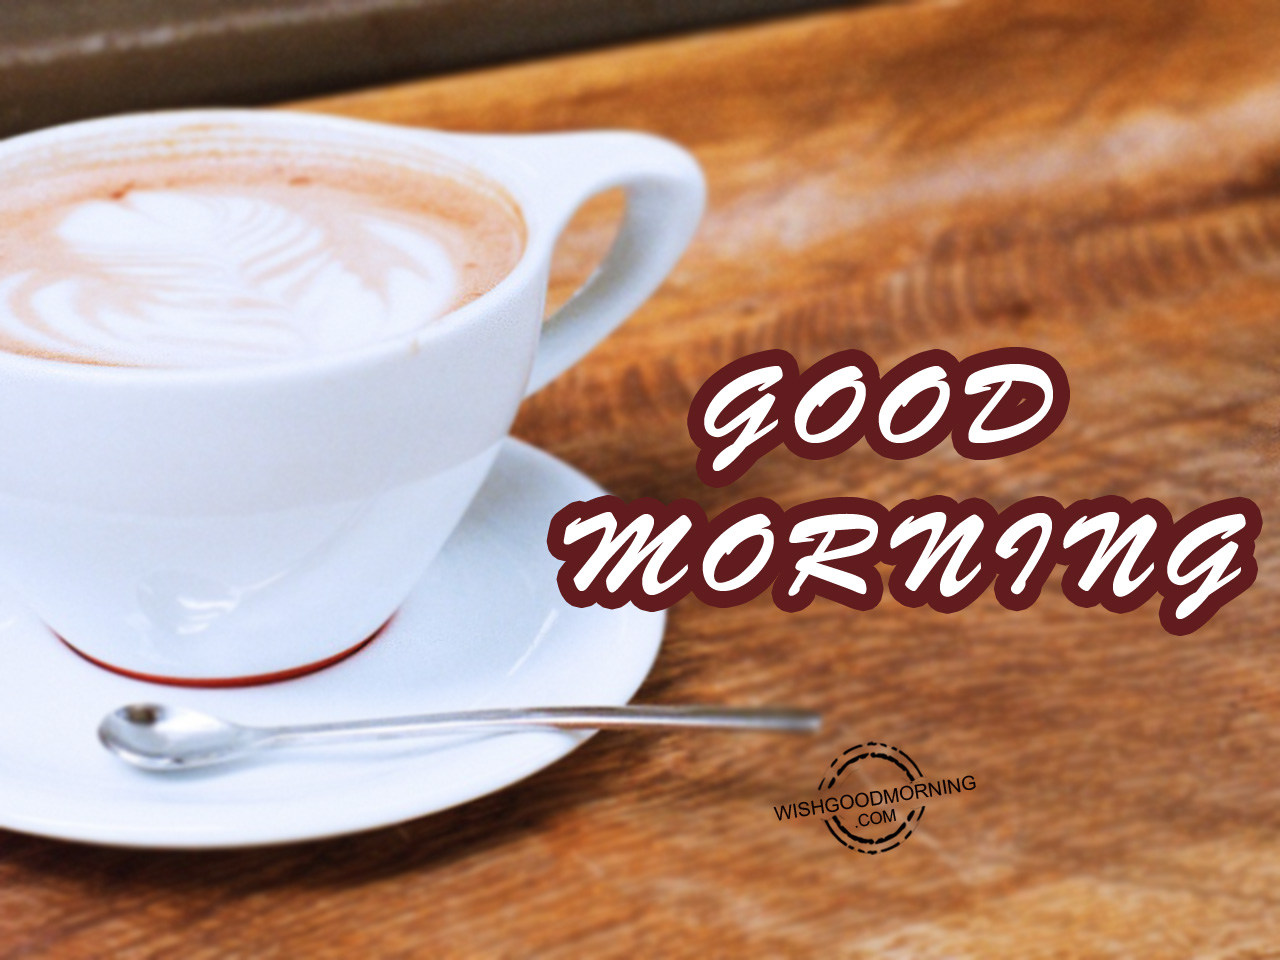 Good Morning Picture - Good Morning Pictures – WishGoodMorning.com